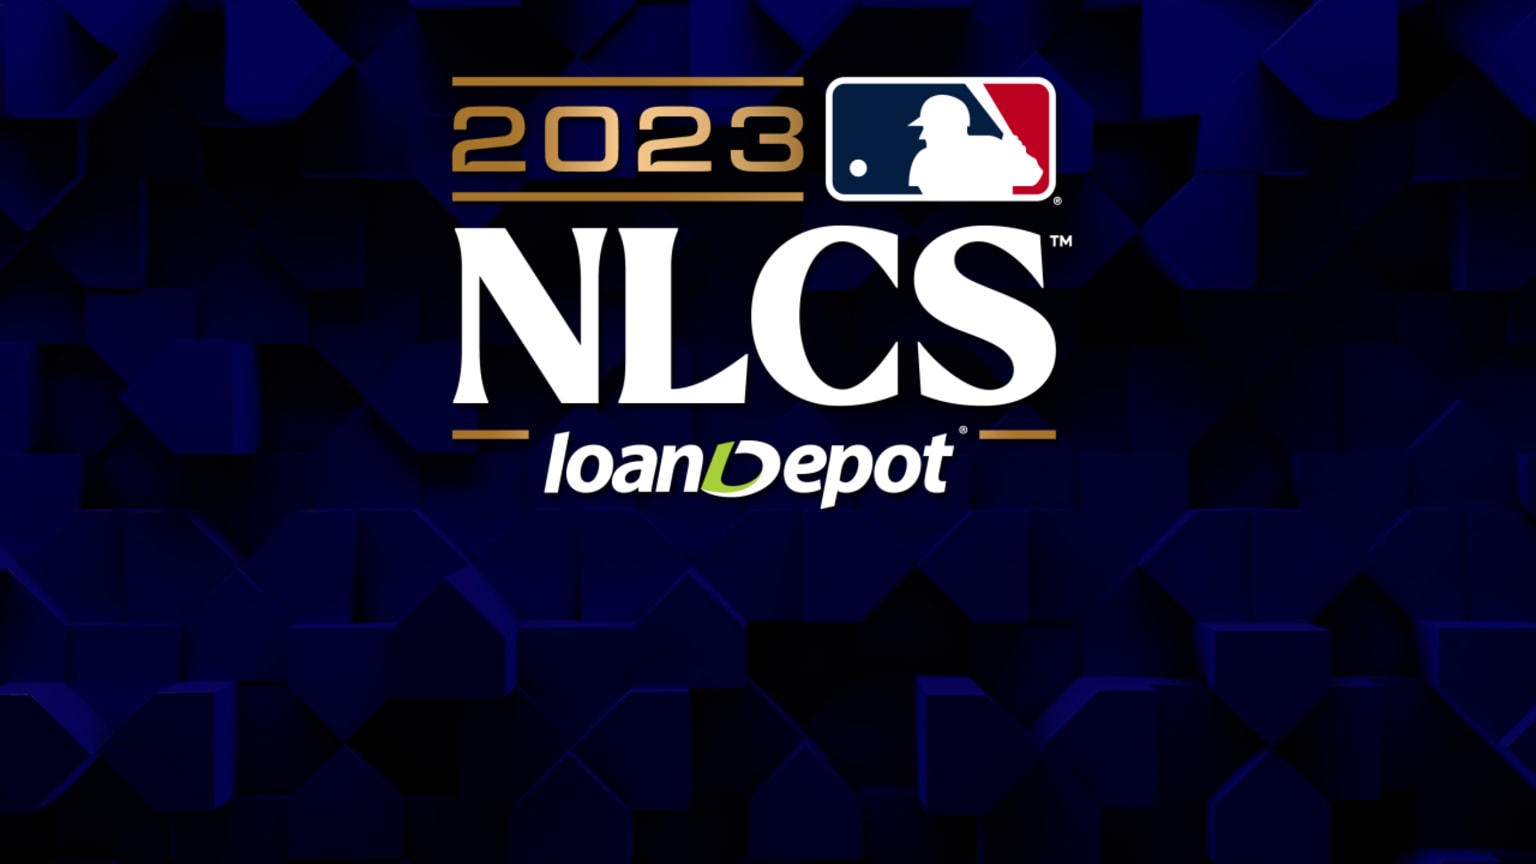 MLB The Show - Upload your MLB The Show 19 logos to the